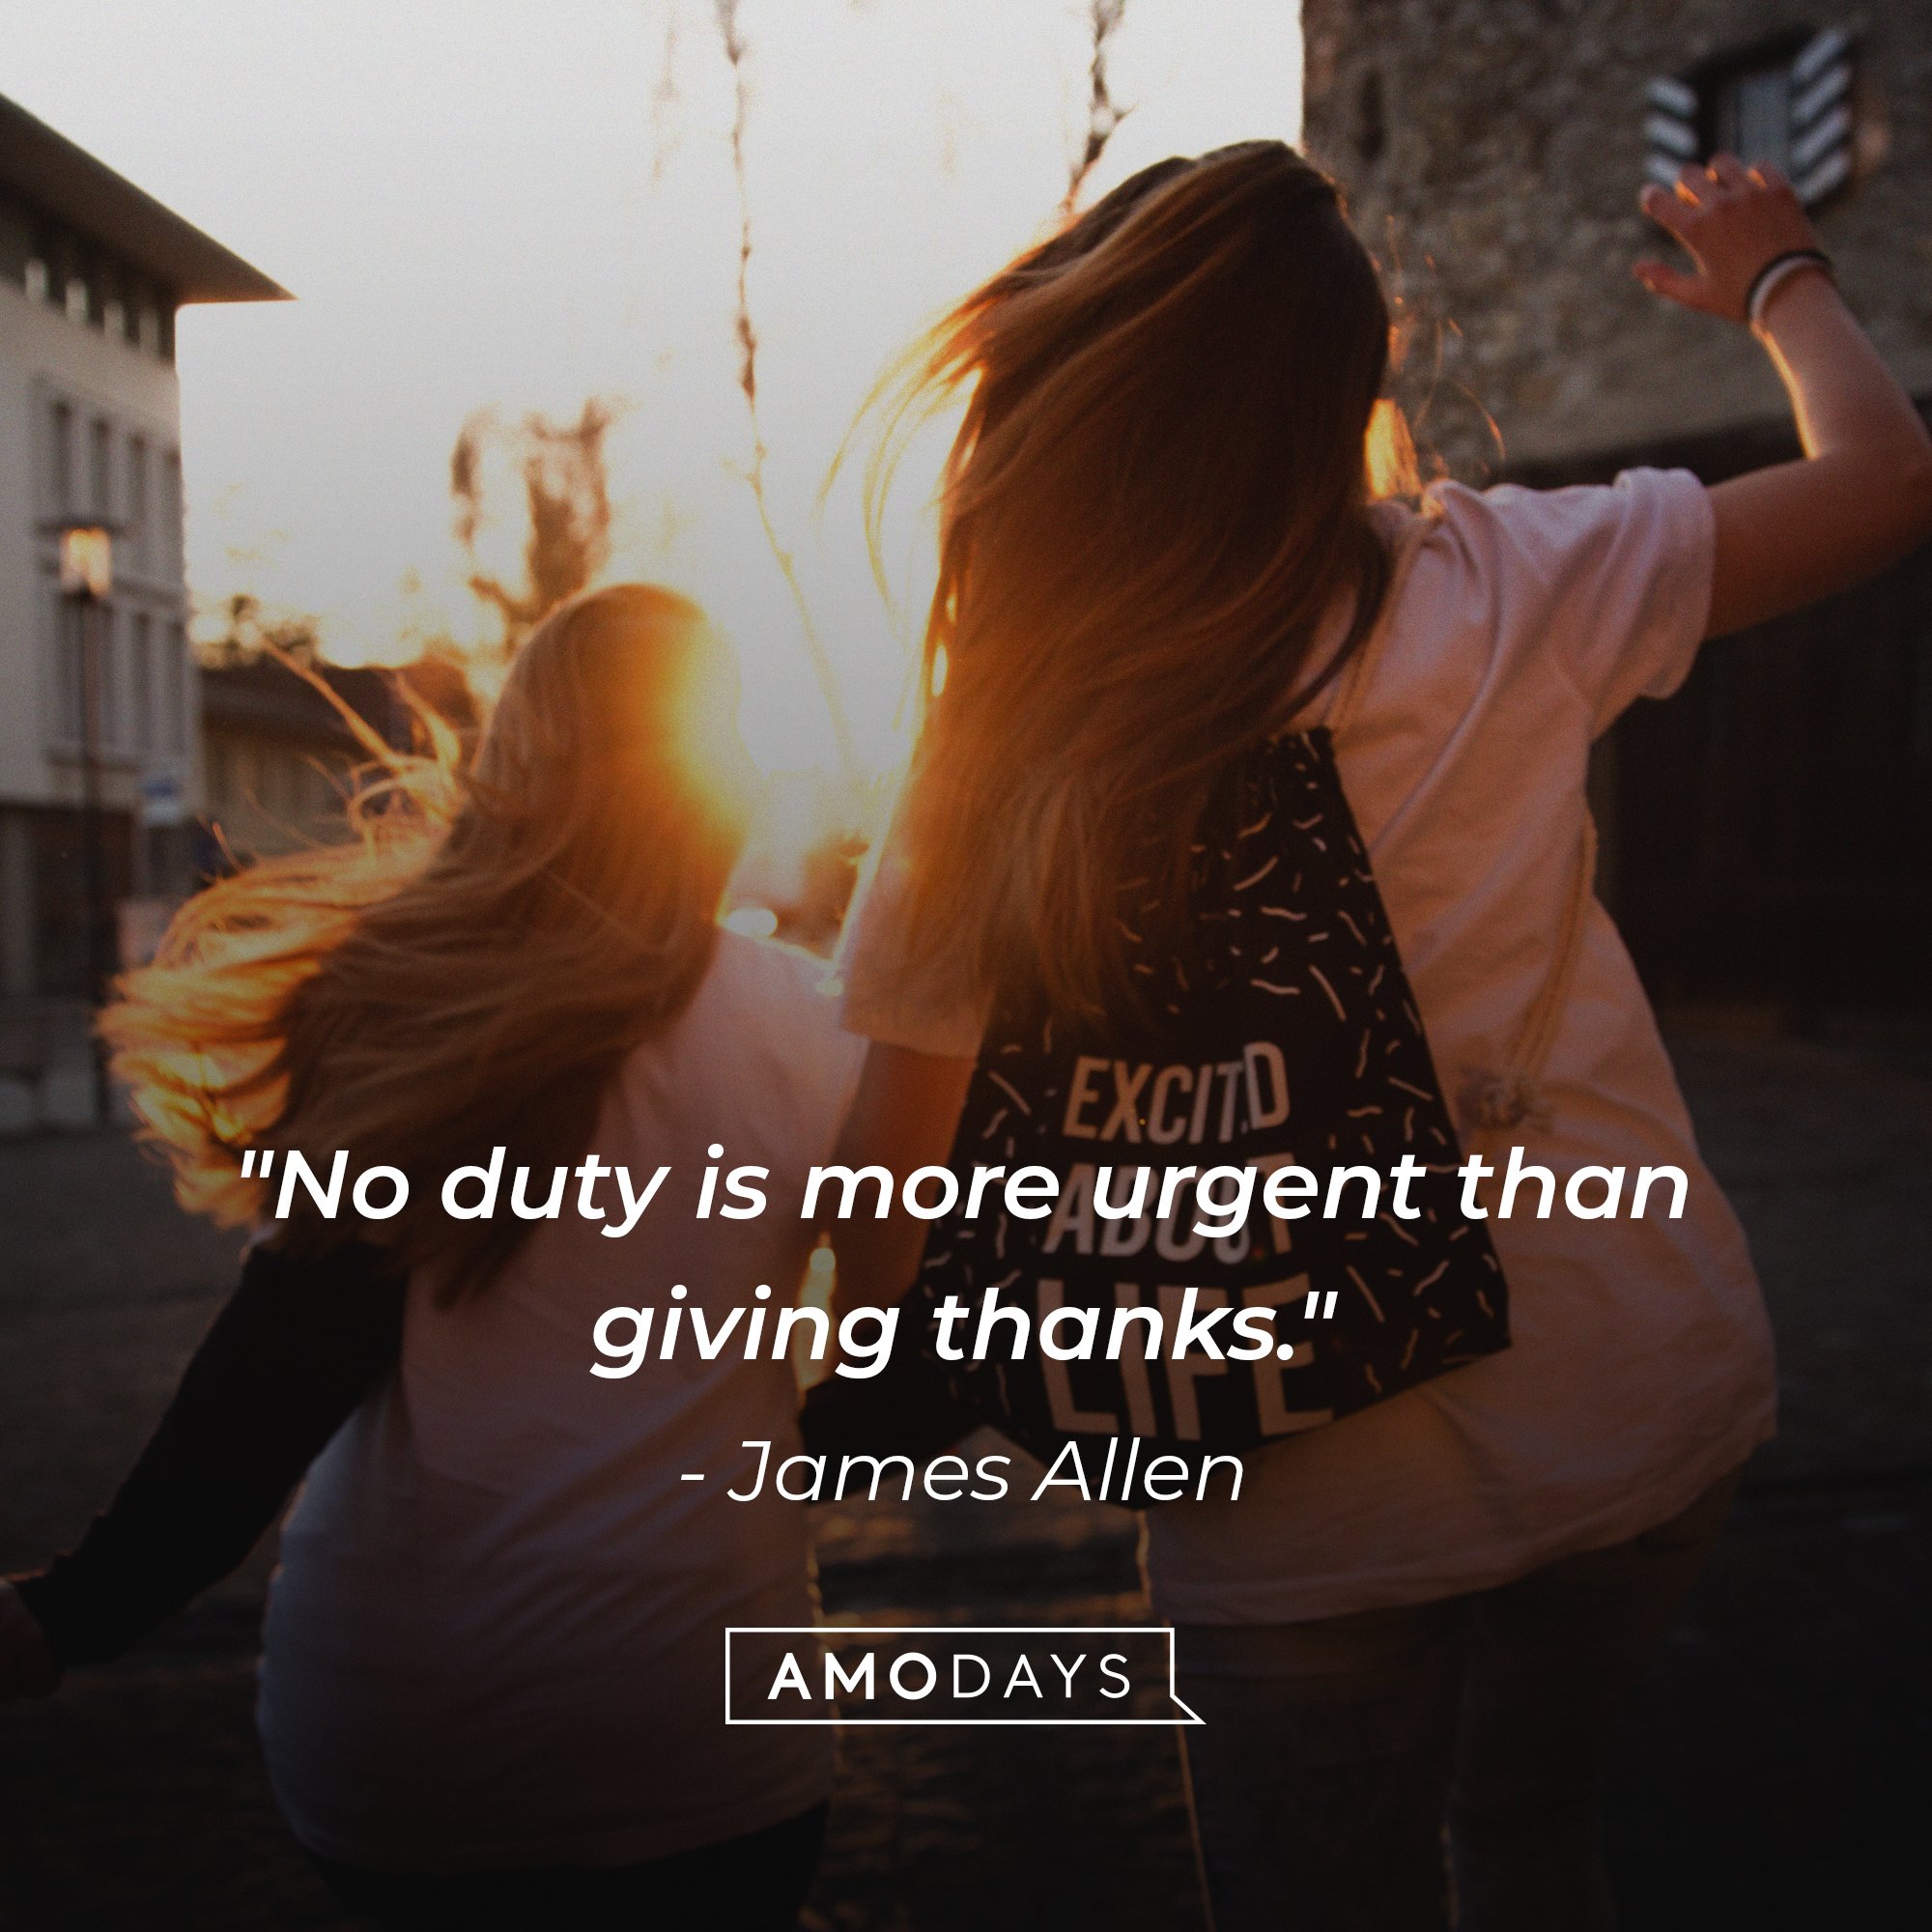 James Allen's quote: "No duty is more urgent than giving thanks." | Image: AmoDays